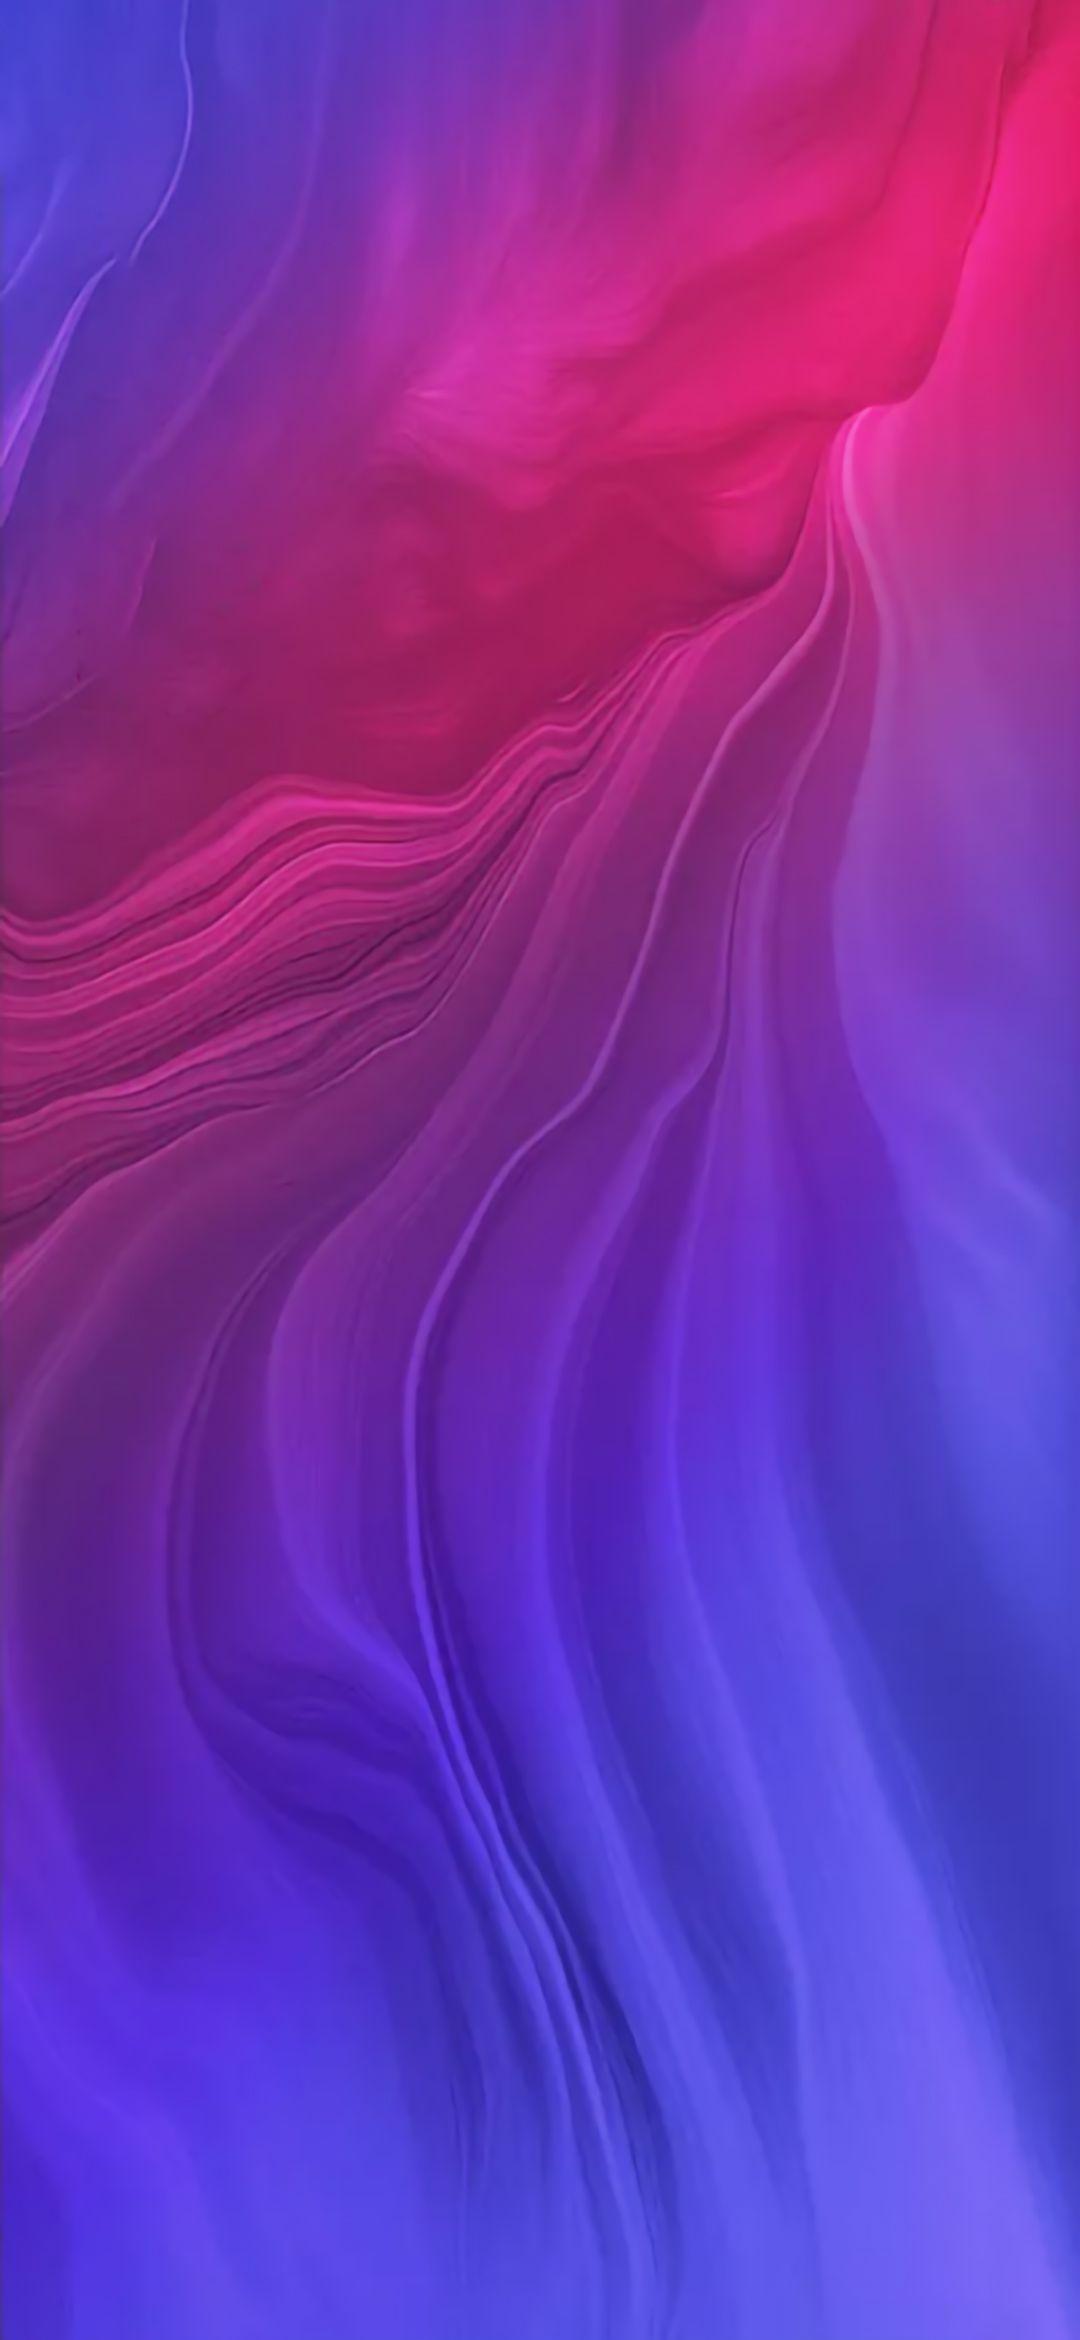 Download Oppo Reno Z Official Wallpaper Here! Full HD Resolution